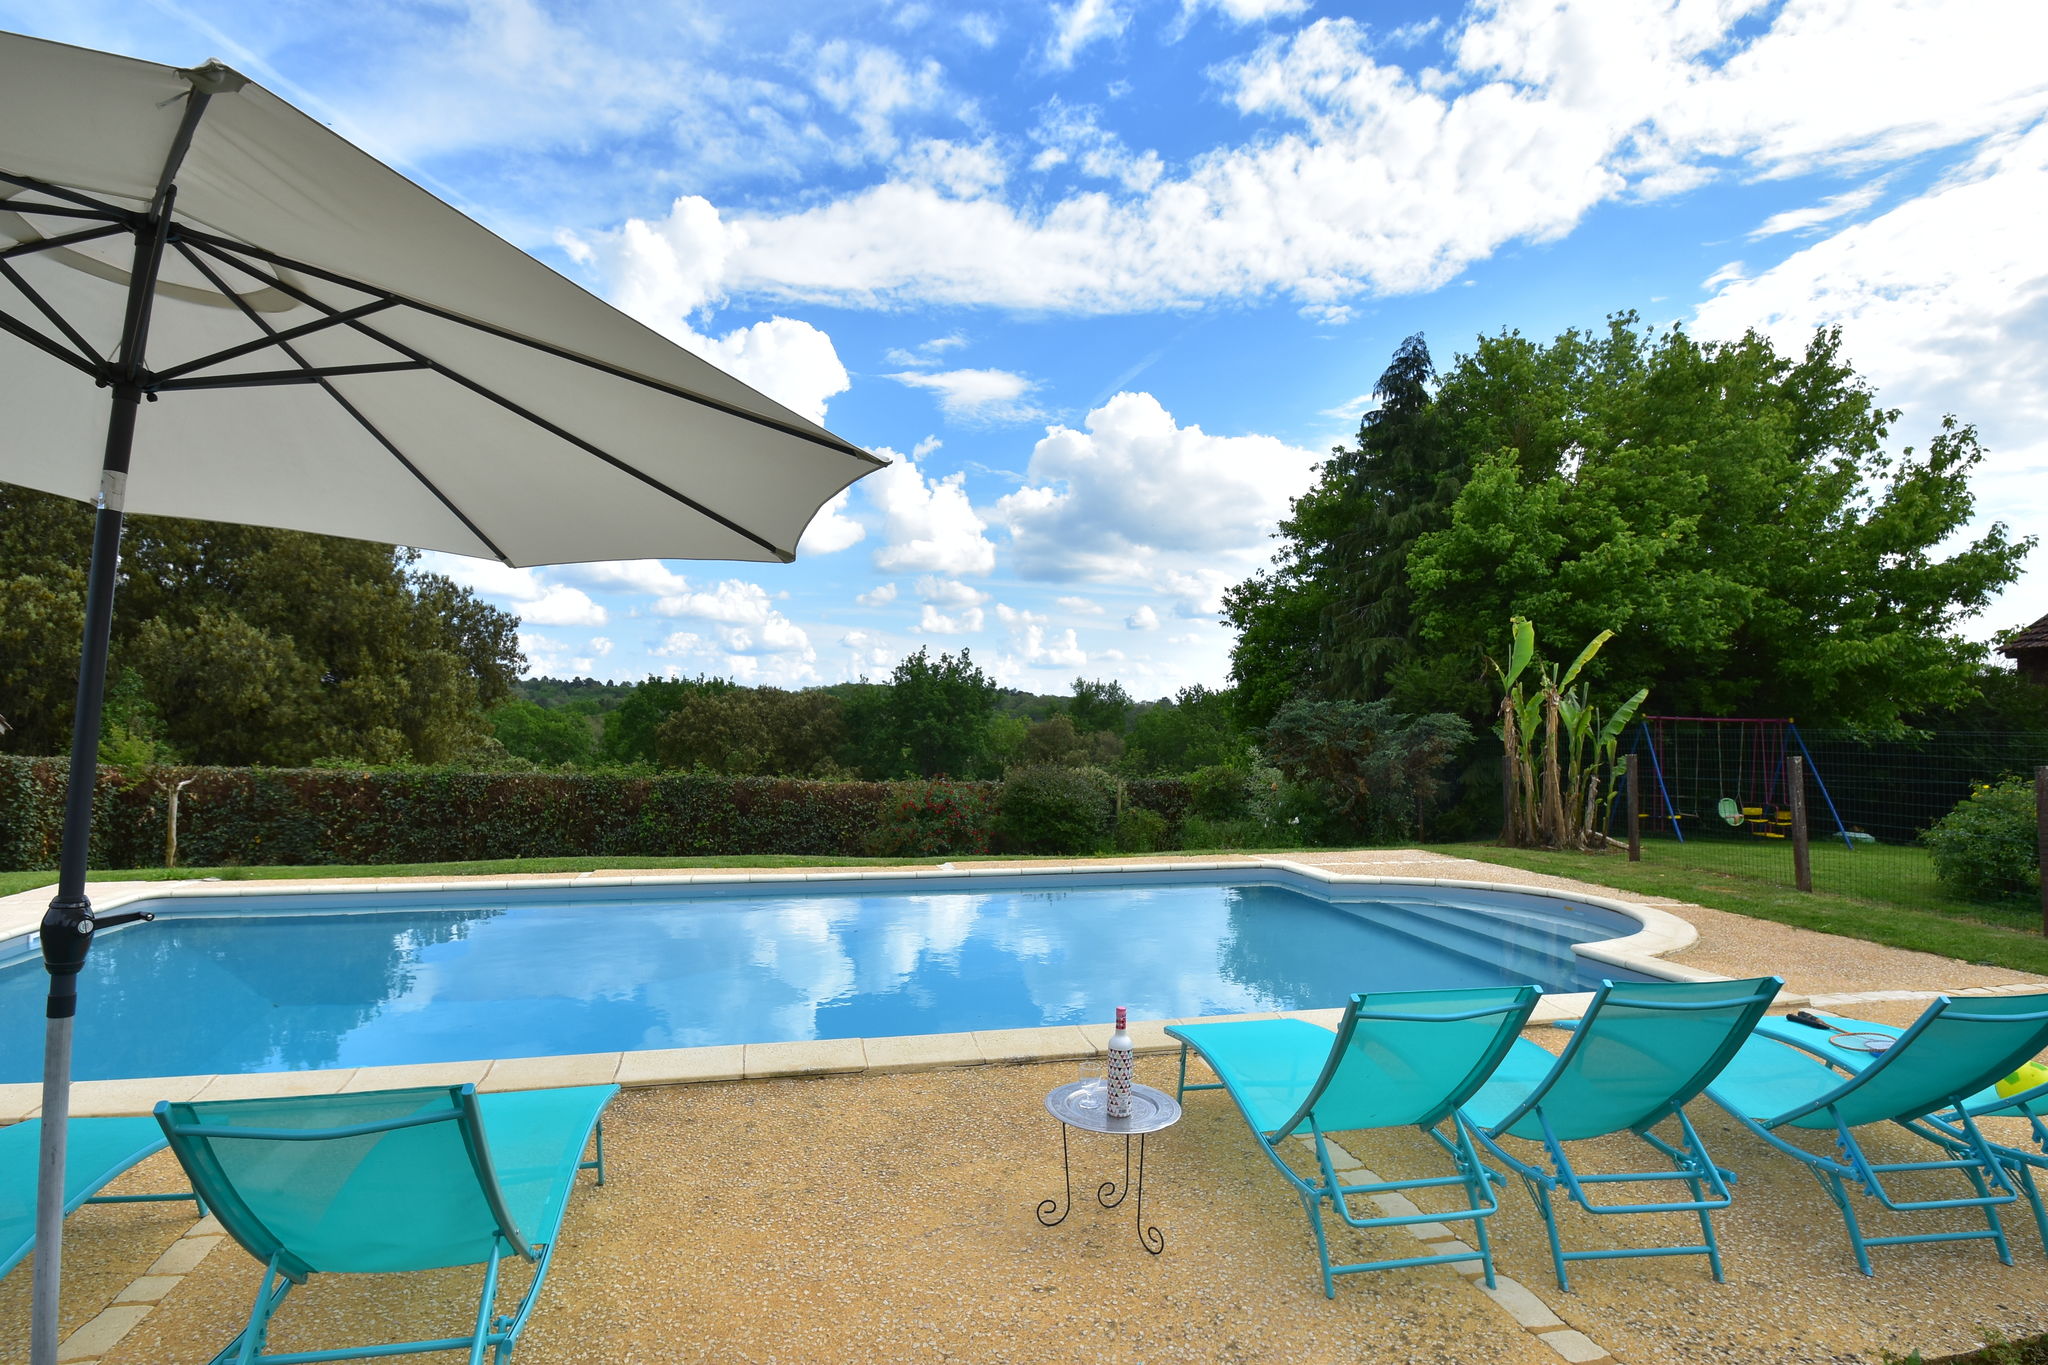 ﻿Modern holiday home in Besse, Dordogne with private pool